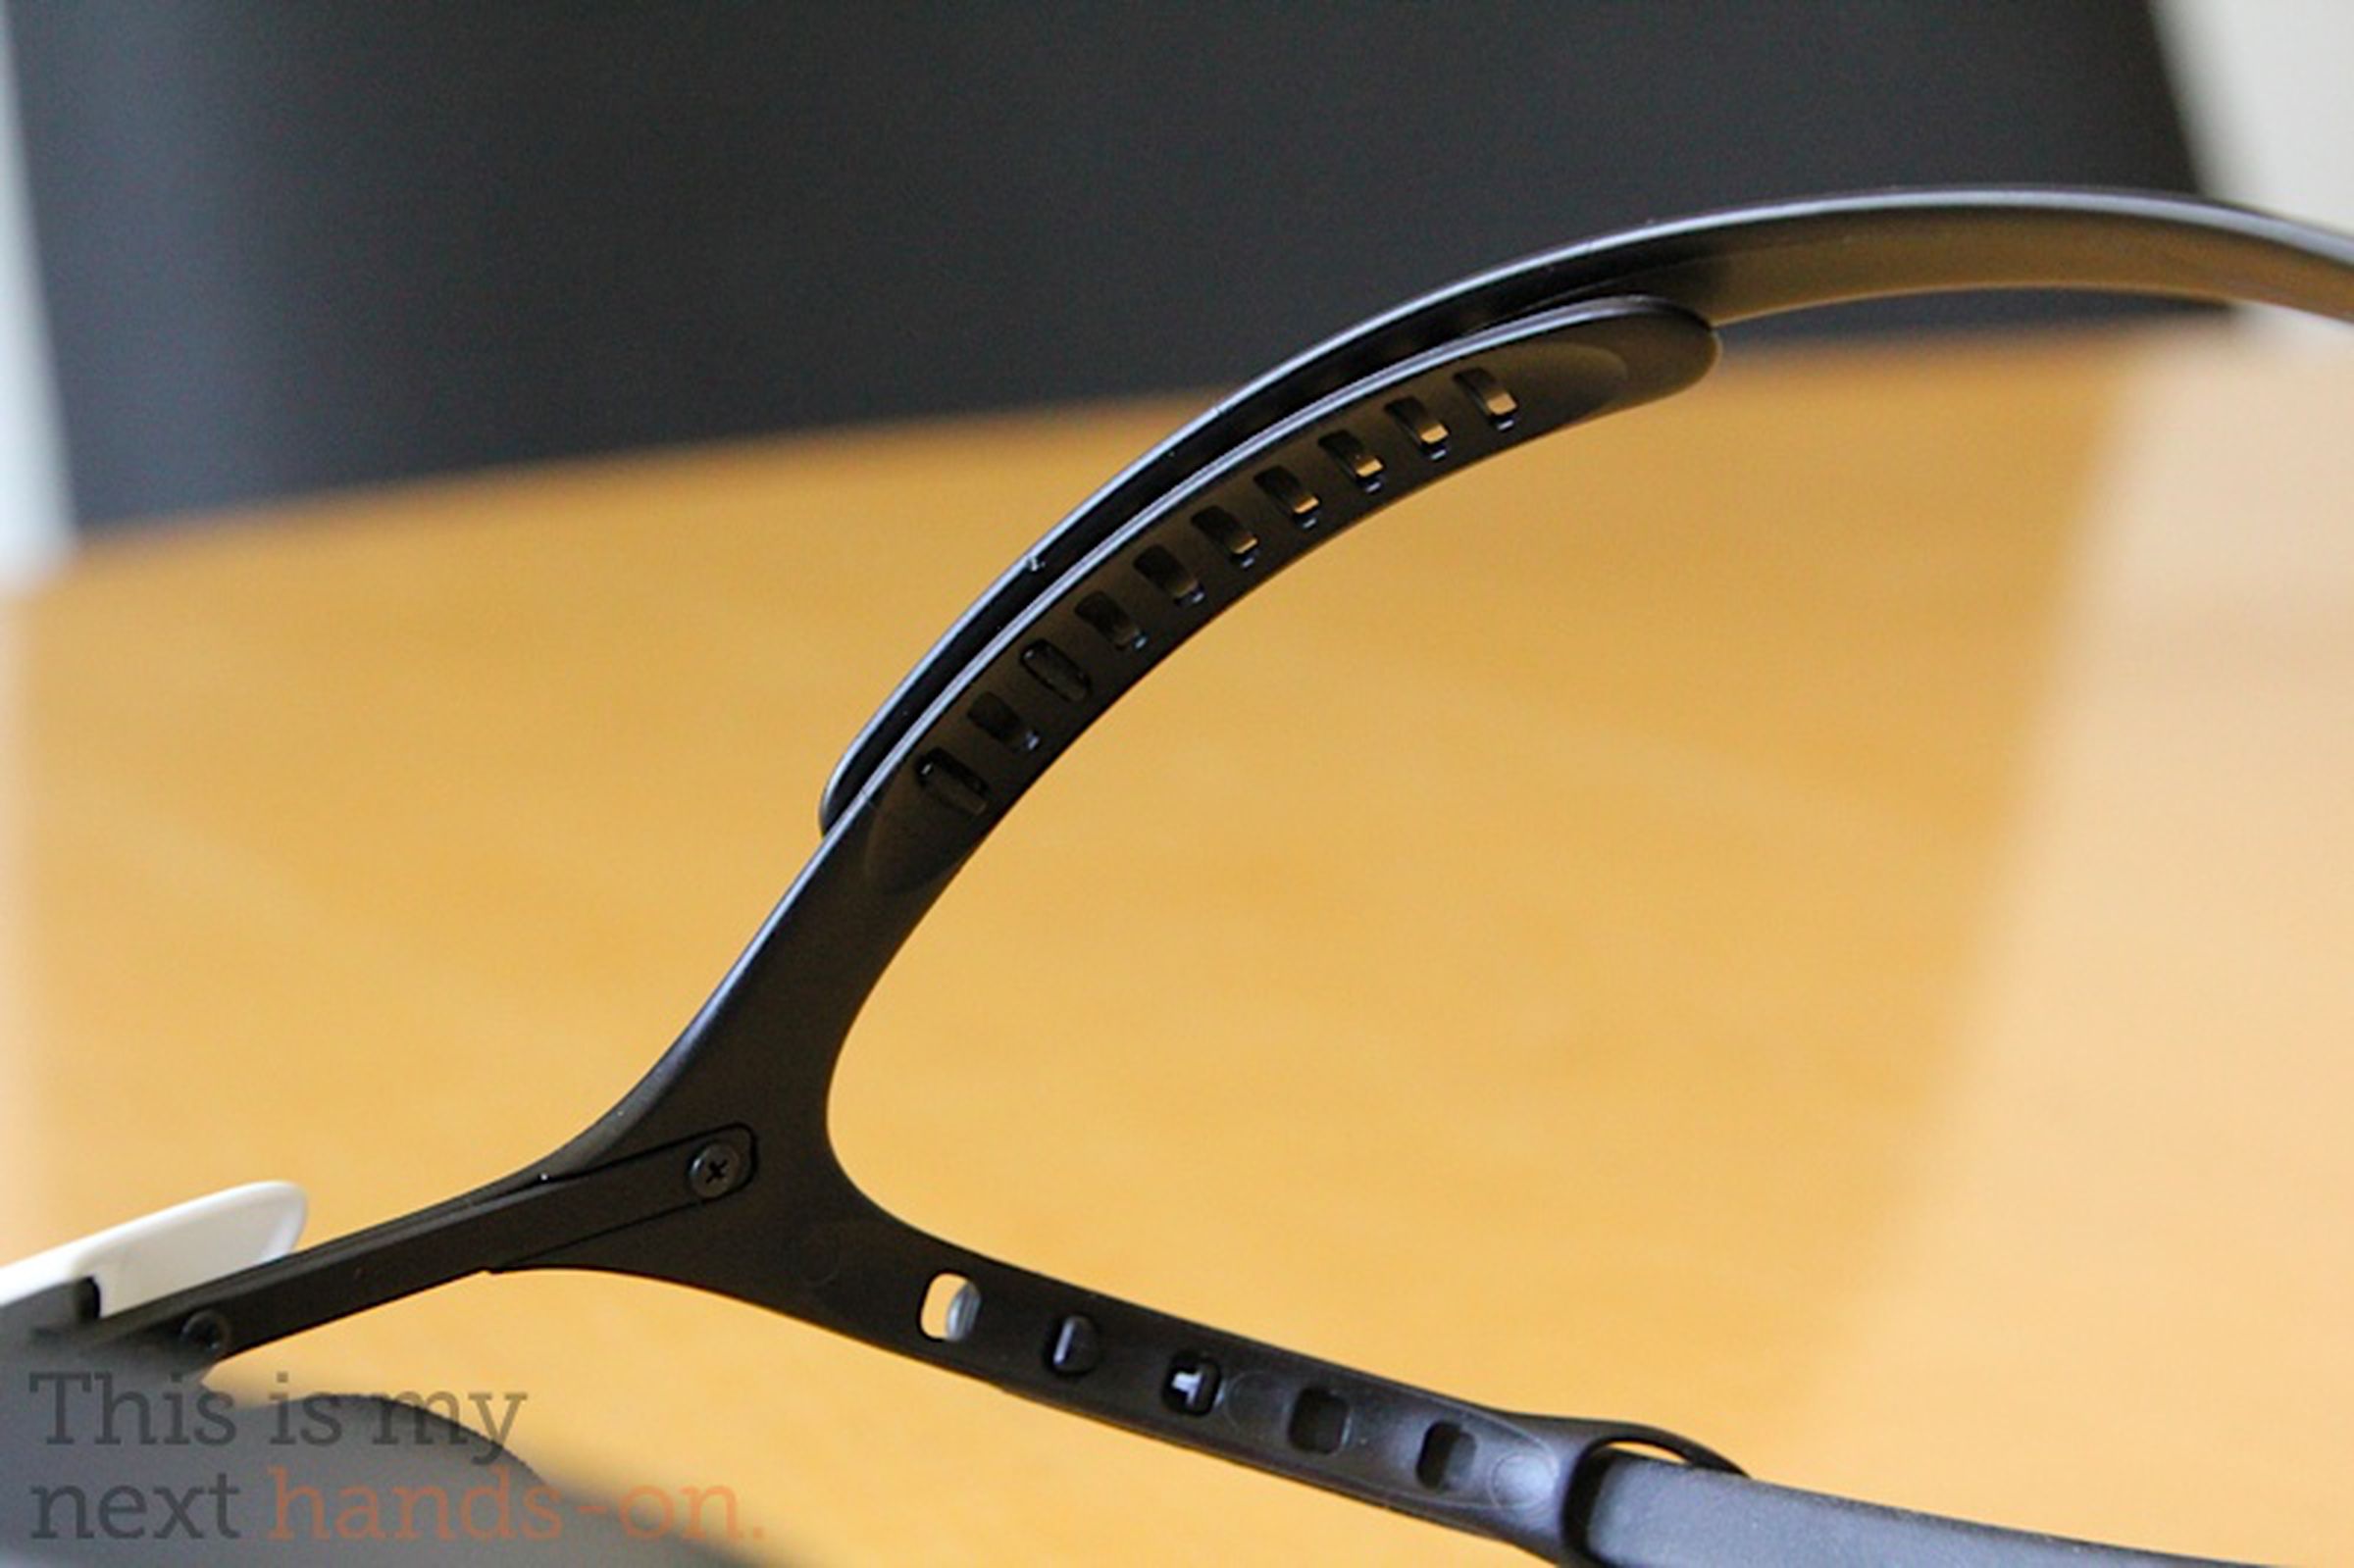 Sony 3D Wearable HDTV: price, release date and hands-on preview